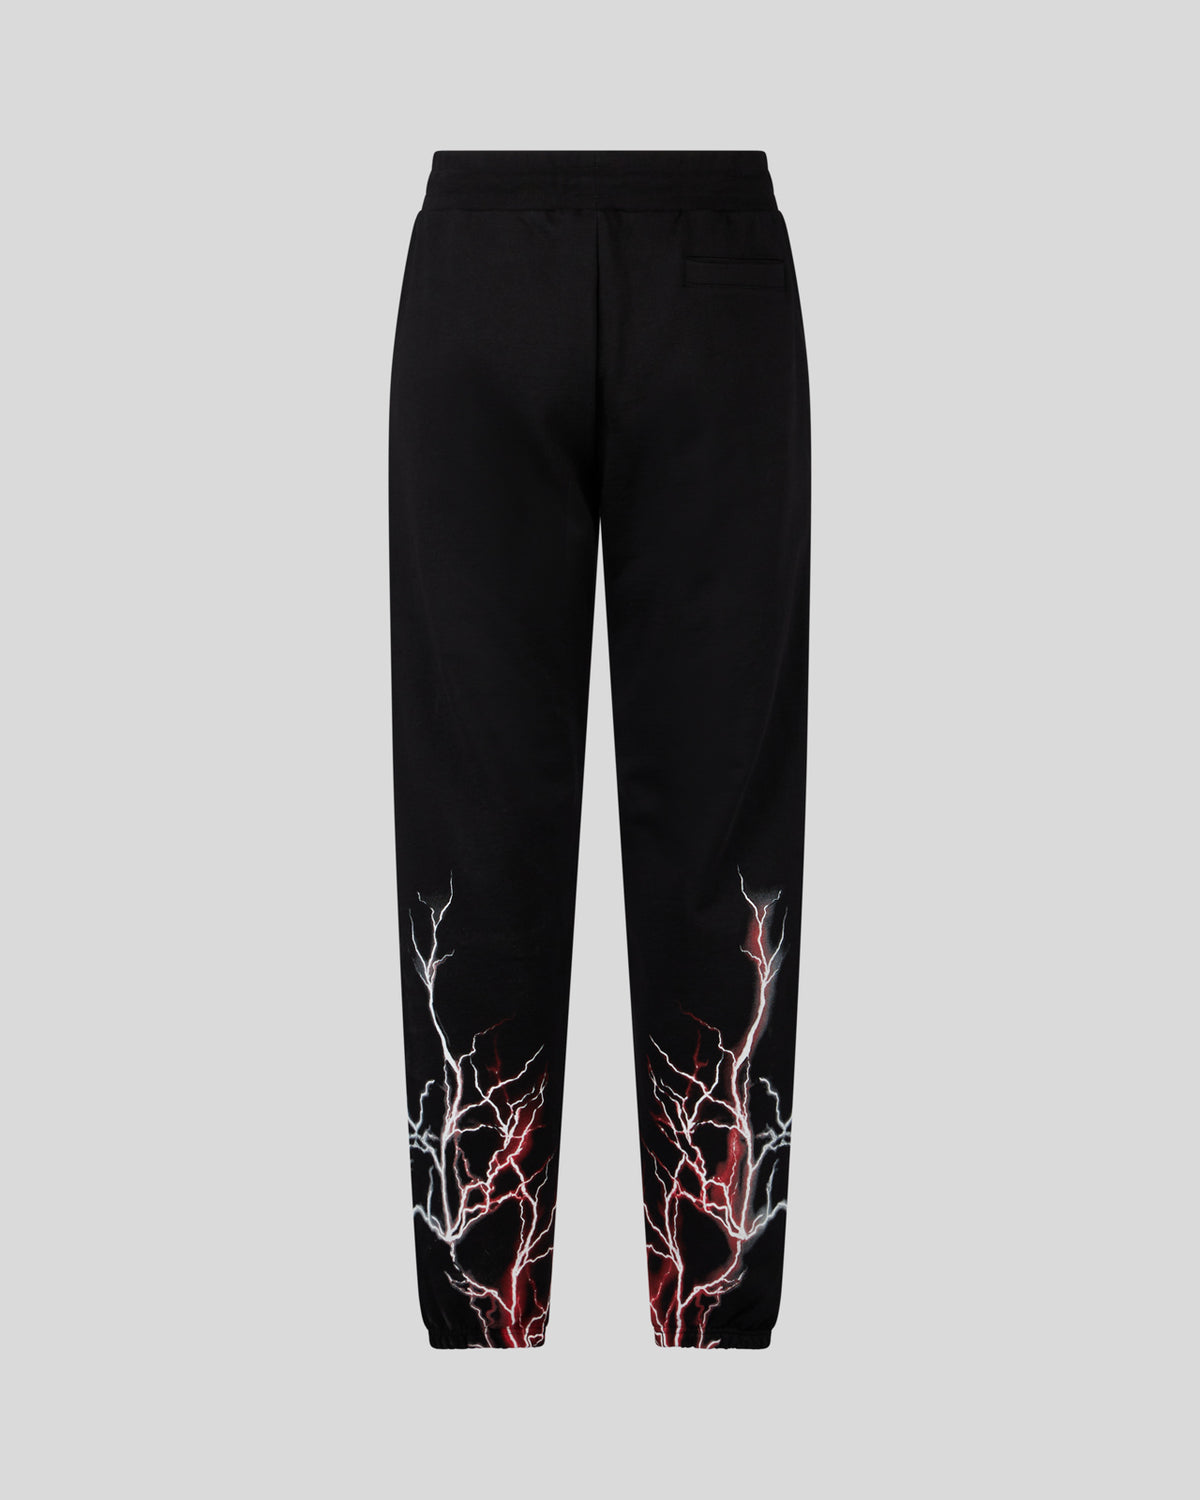 PHOBIA BLACK PANT WITH RED GREY LIGHTNING